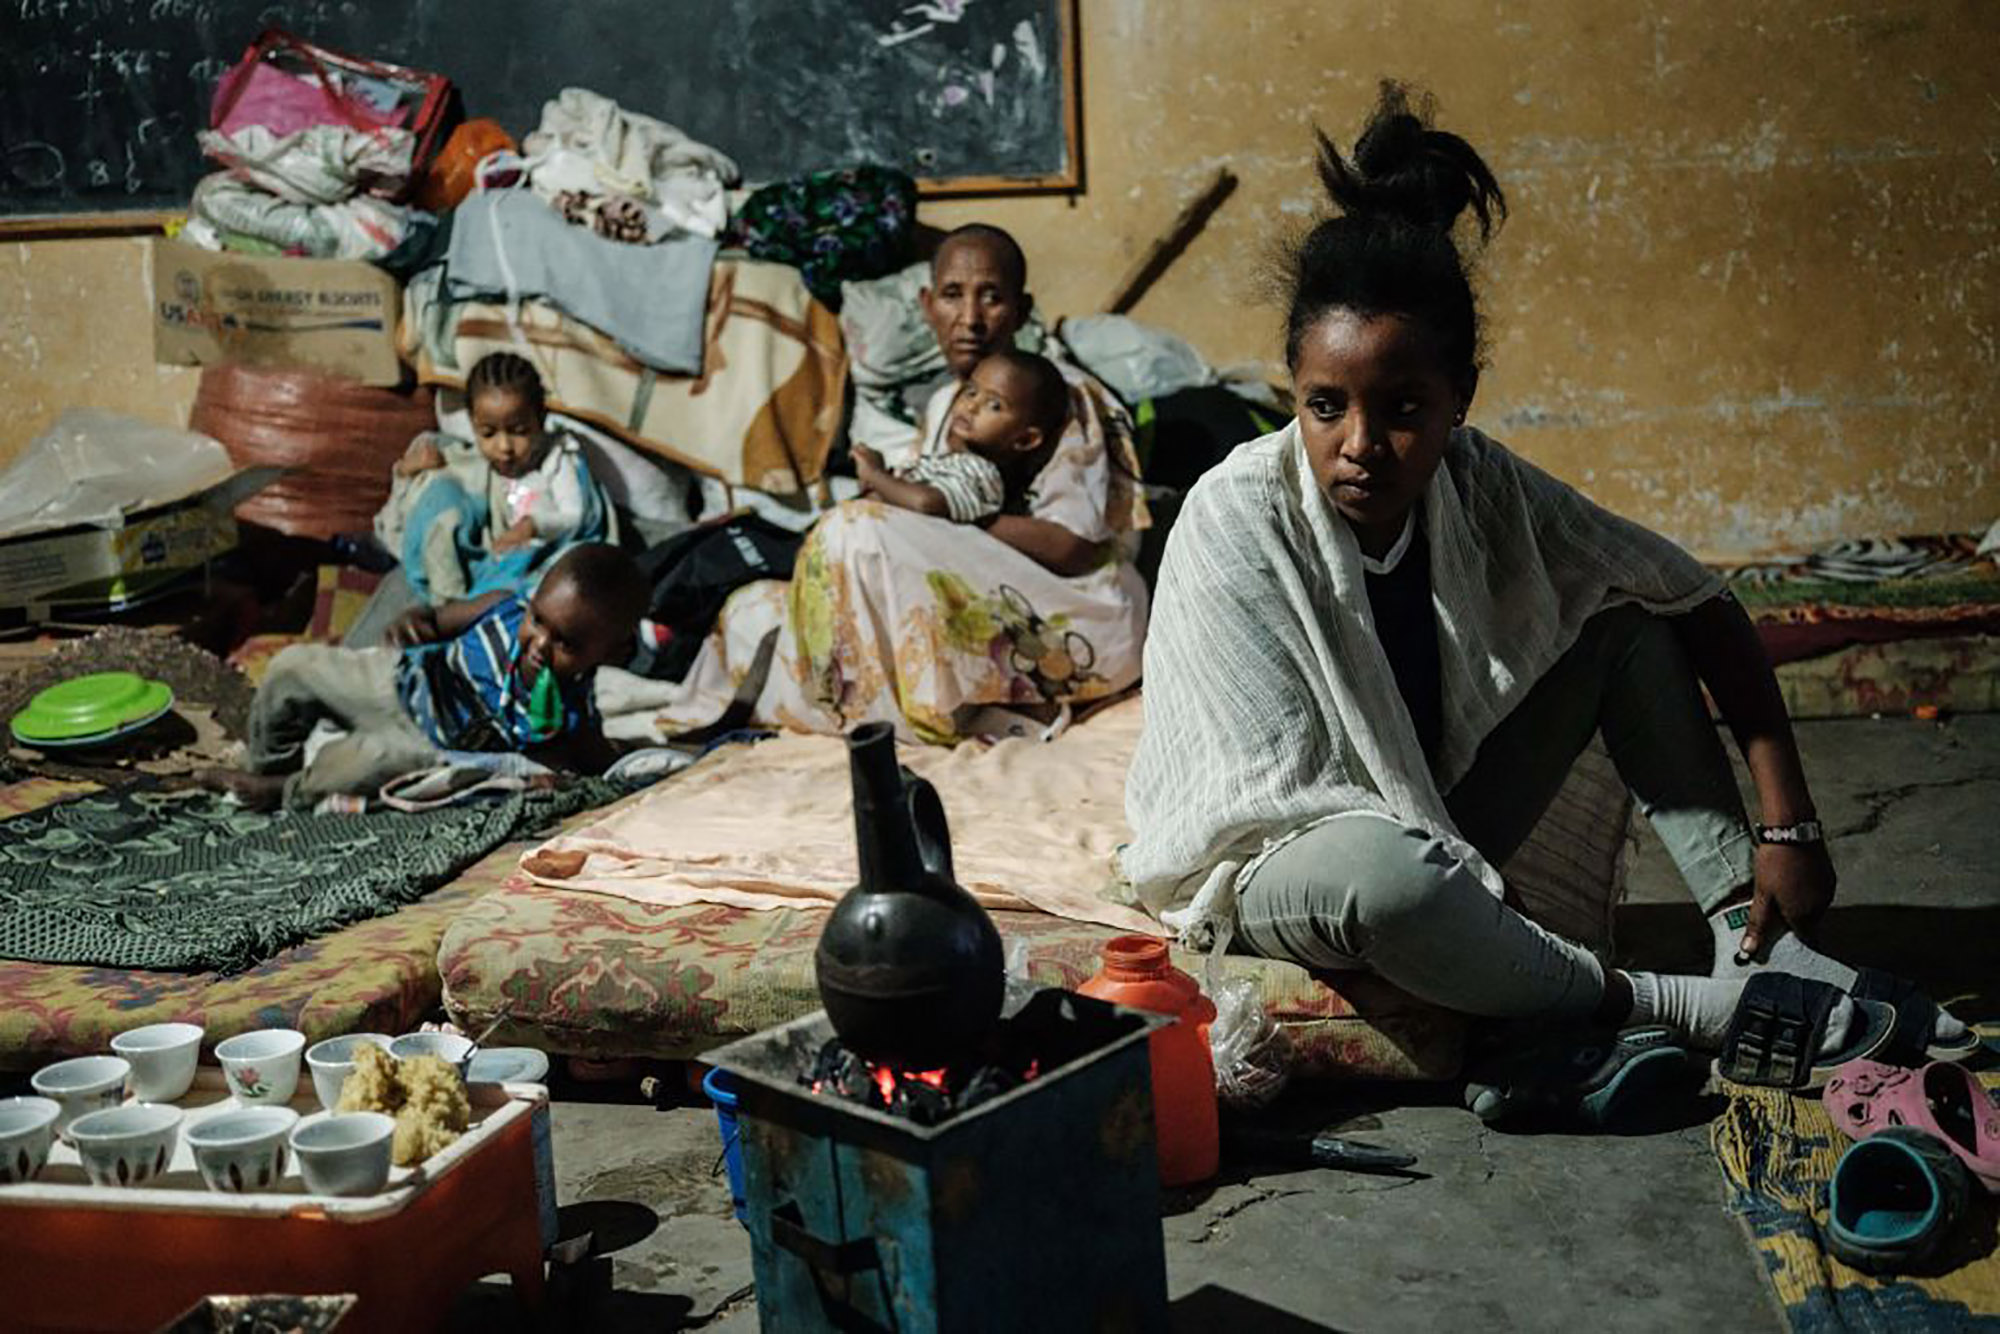 Families who fled from violence in the Tigray region shelter in a classroom in Mekele, on June 18.